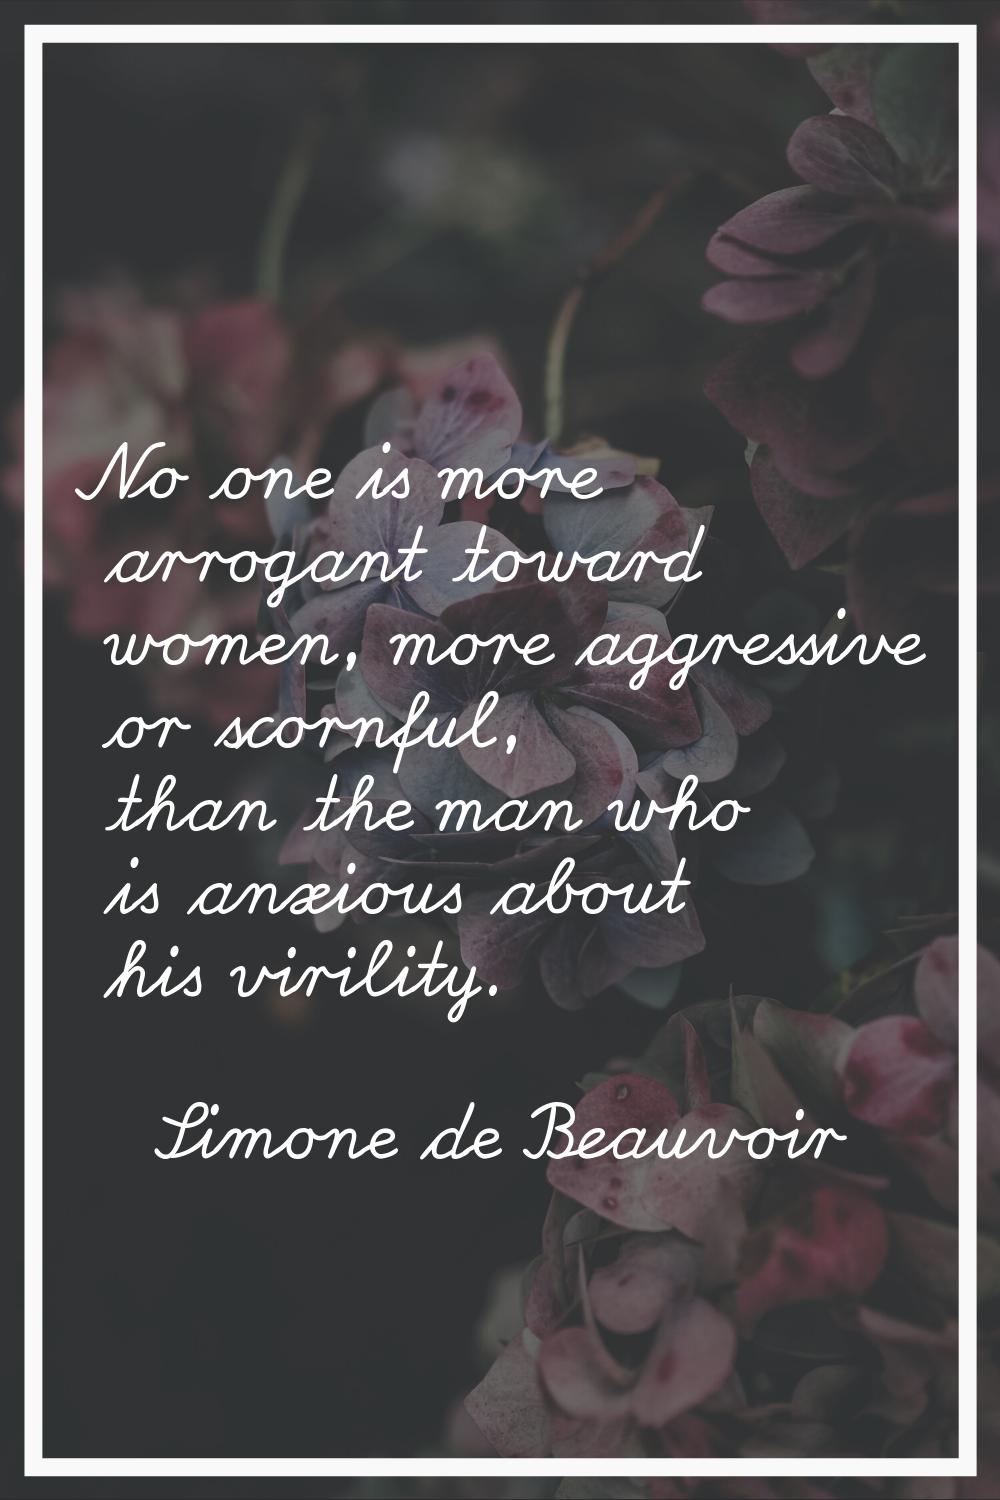 No one is more arrogant toward women, more aggressive or scornful, than the man who is anxious abou